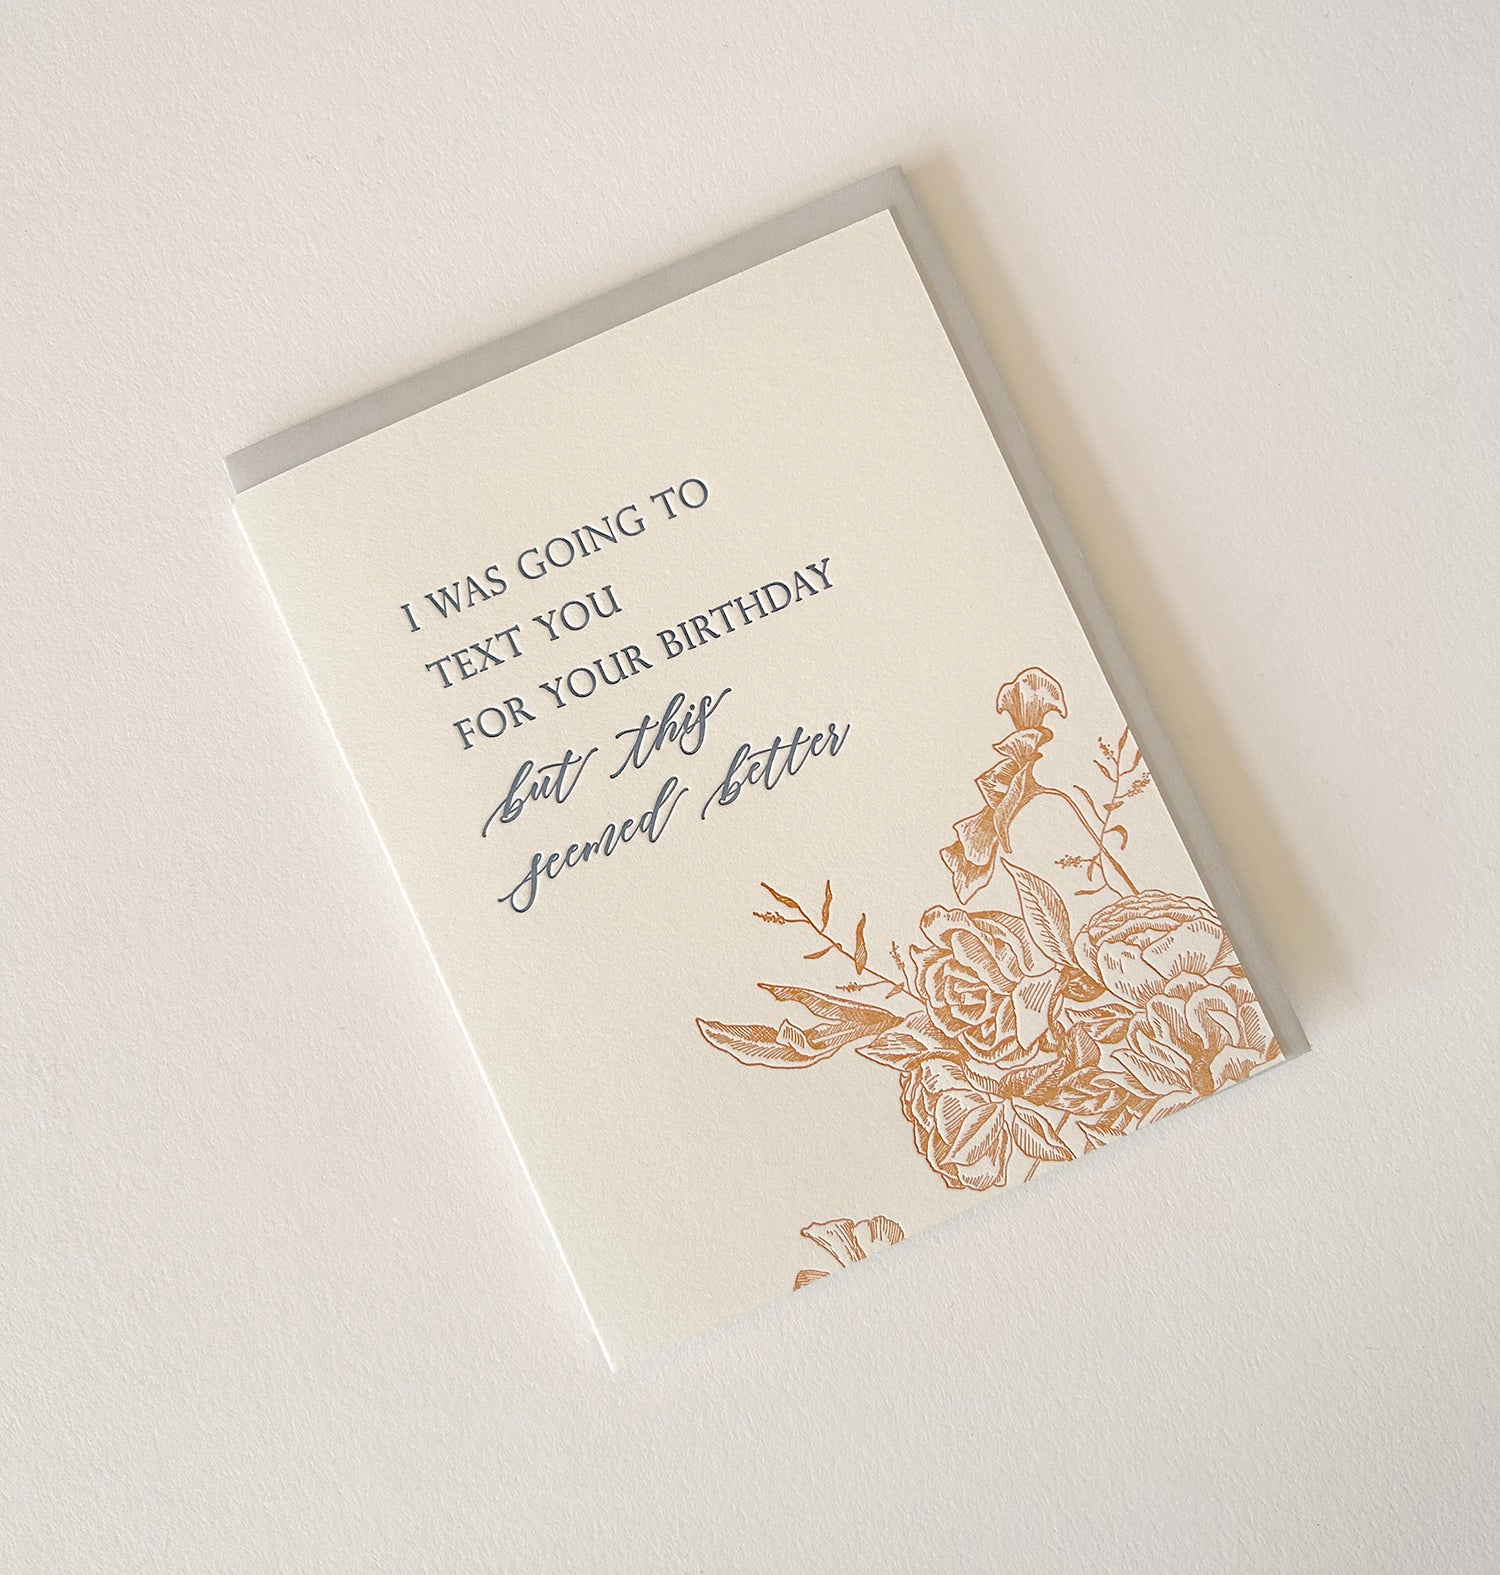 Letterpress birthday card with florals that says " I was going to text you for your birthday but this seemed better" by Rust Belt Love